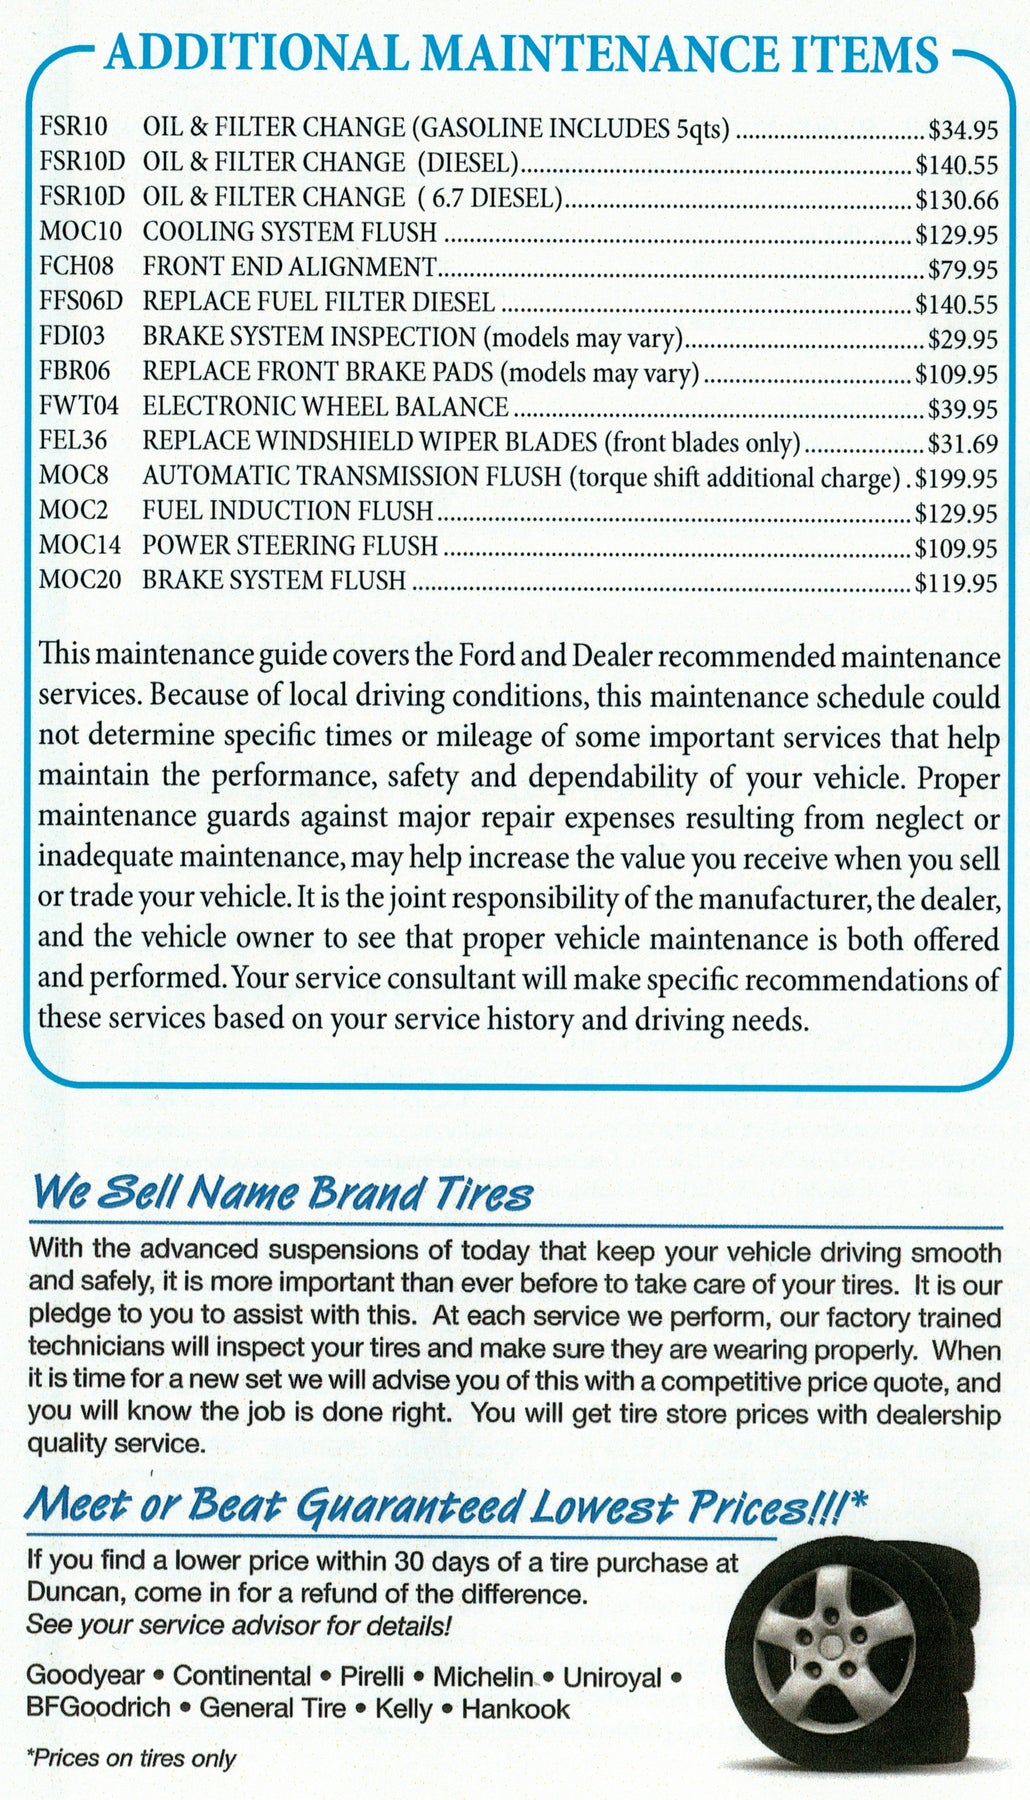 Ford Maintenance Page 6